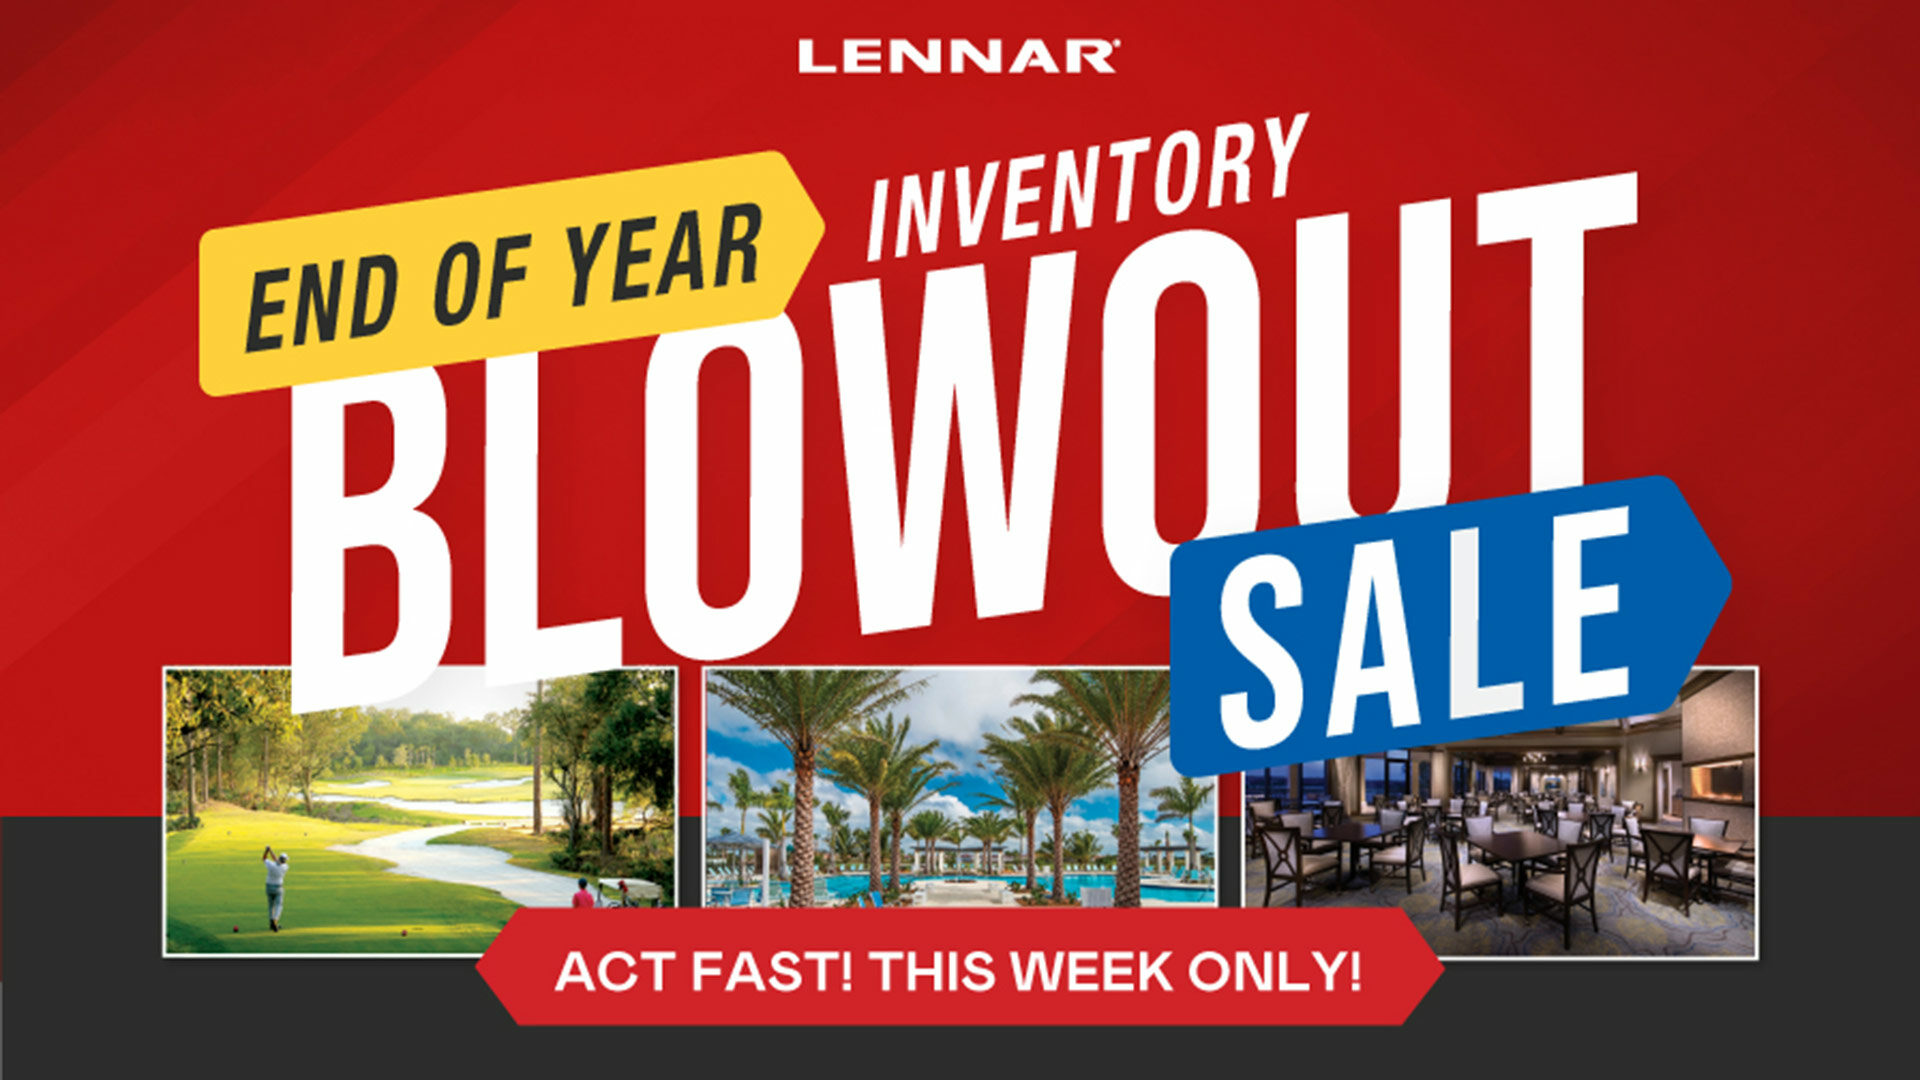 Lennar's Inventory Blowout Sale Limited Time Offer on New Homes with